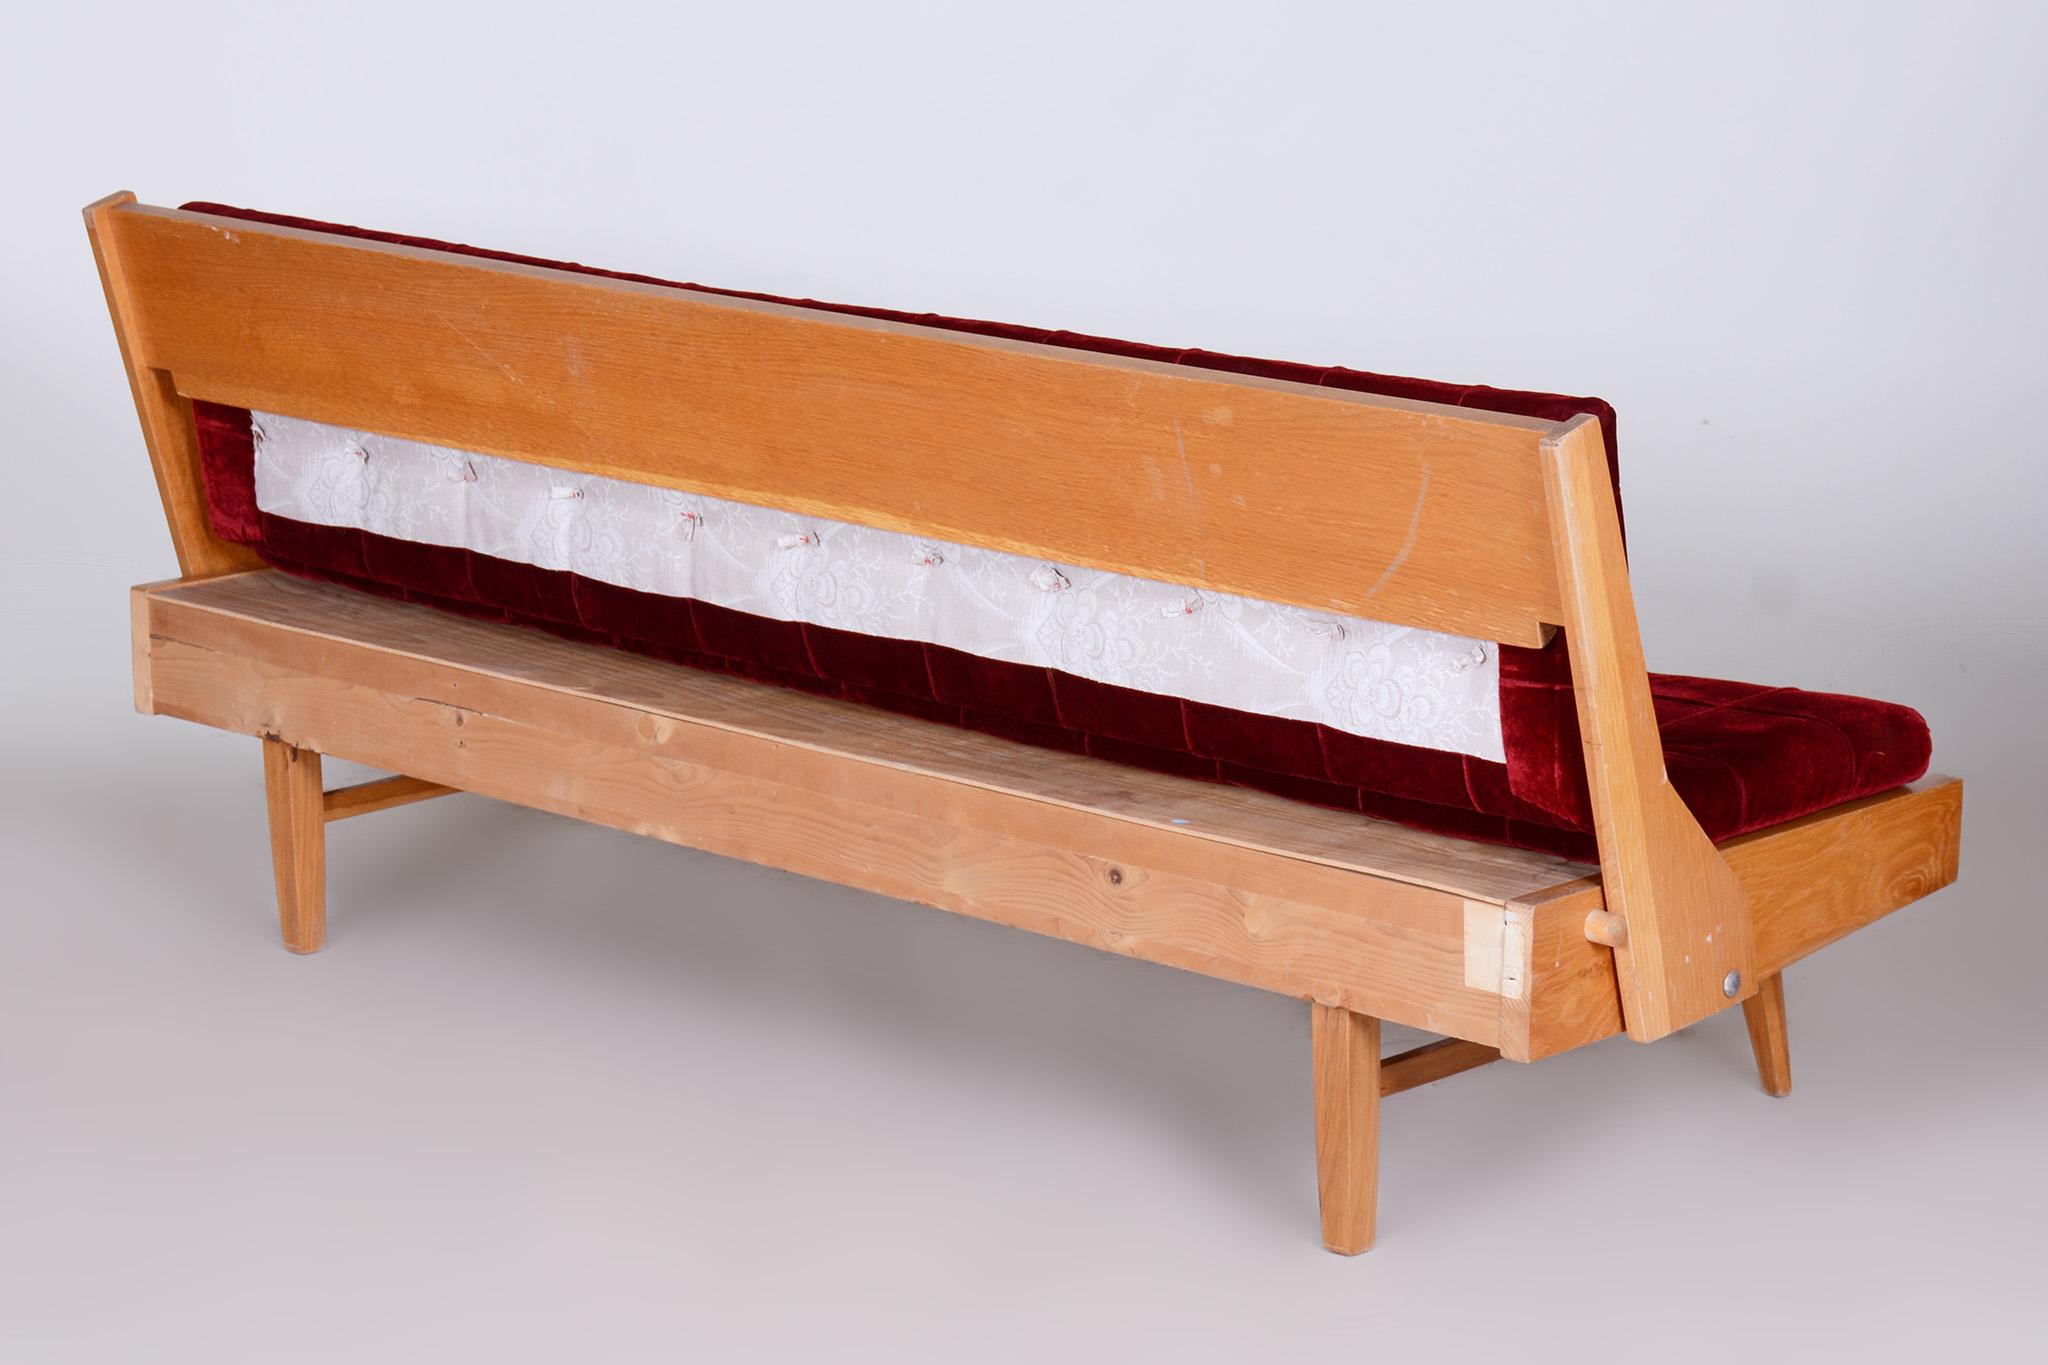 Red Mid-Century Modern Oak Sofa, 1950s, Original Well Preserved Upholstery For Sale 6